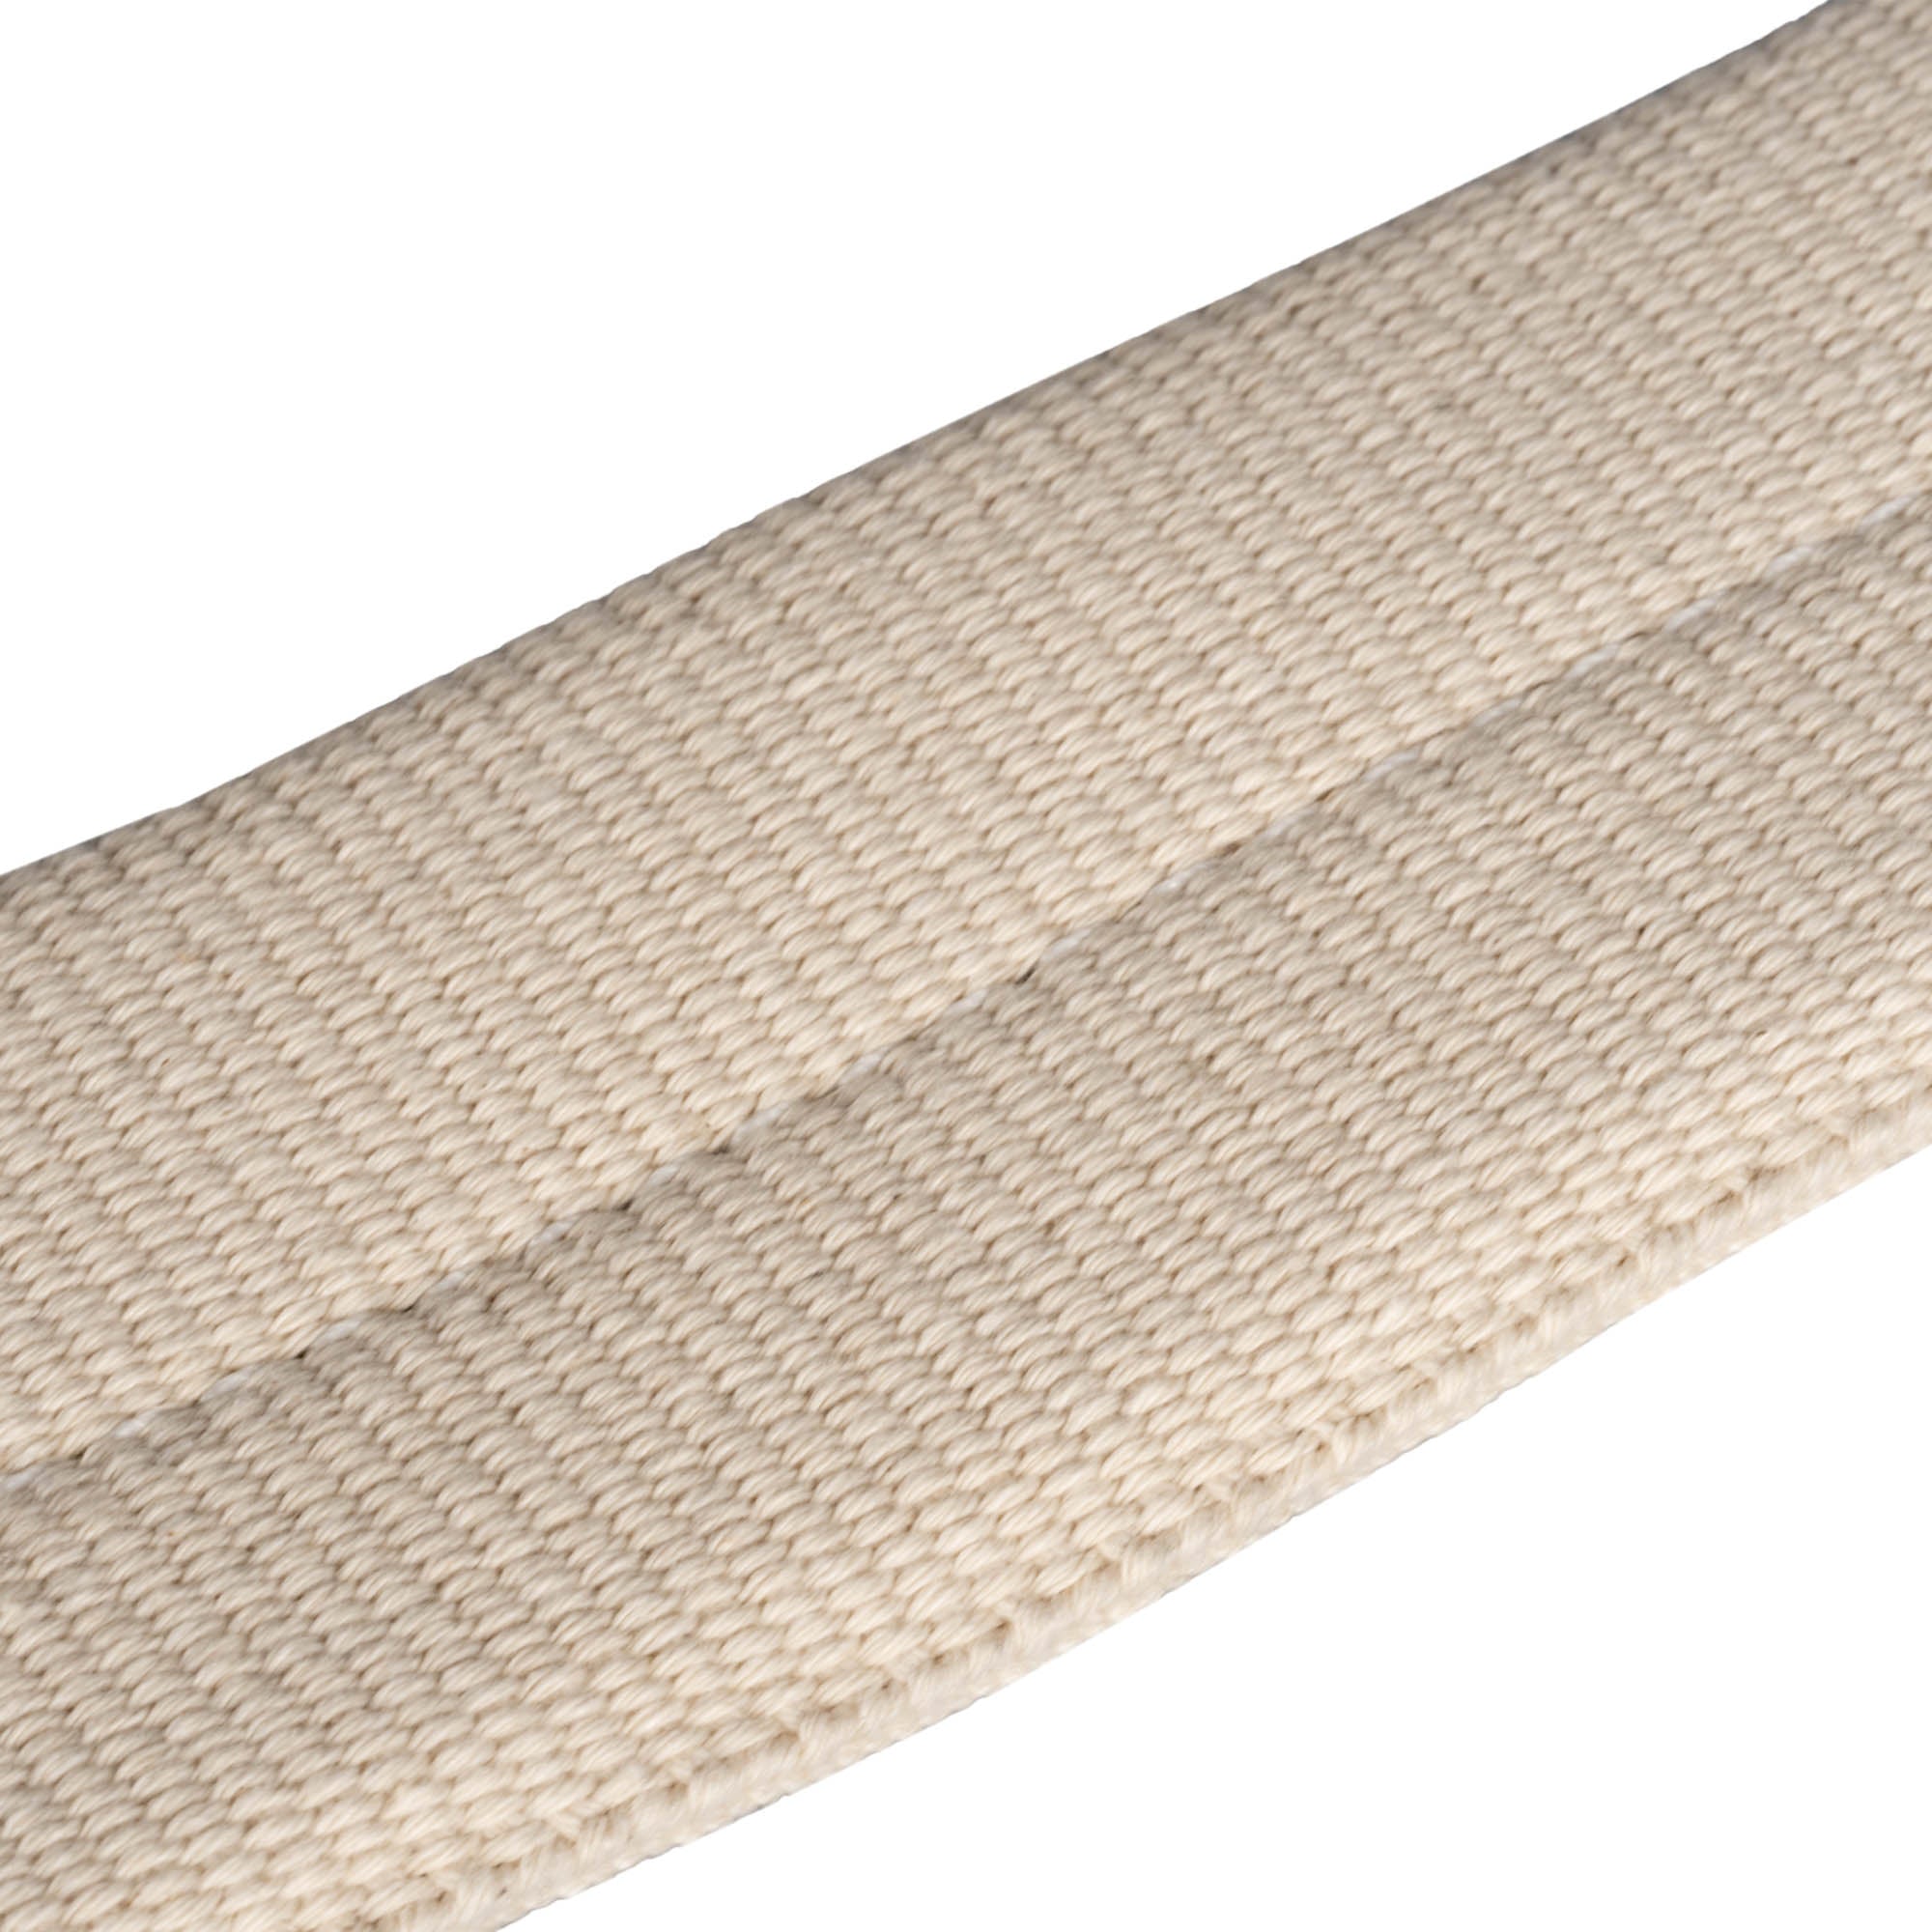 Prodigy cotton covered aerial straps texture